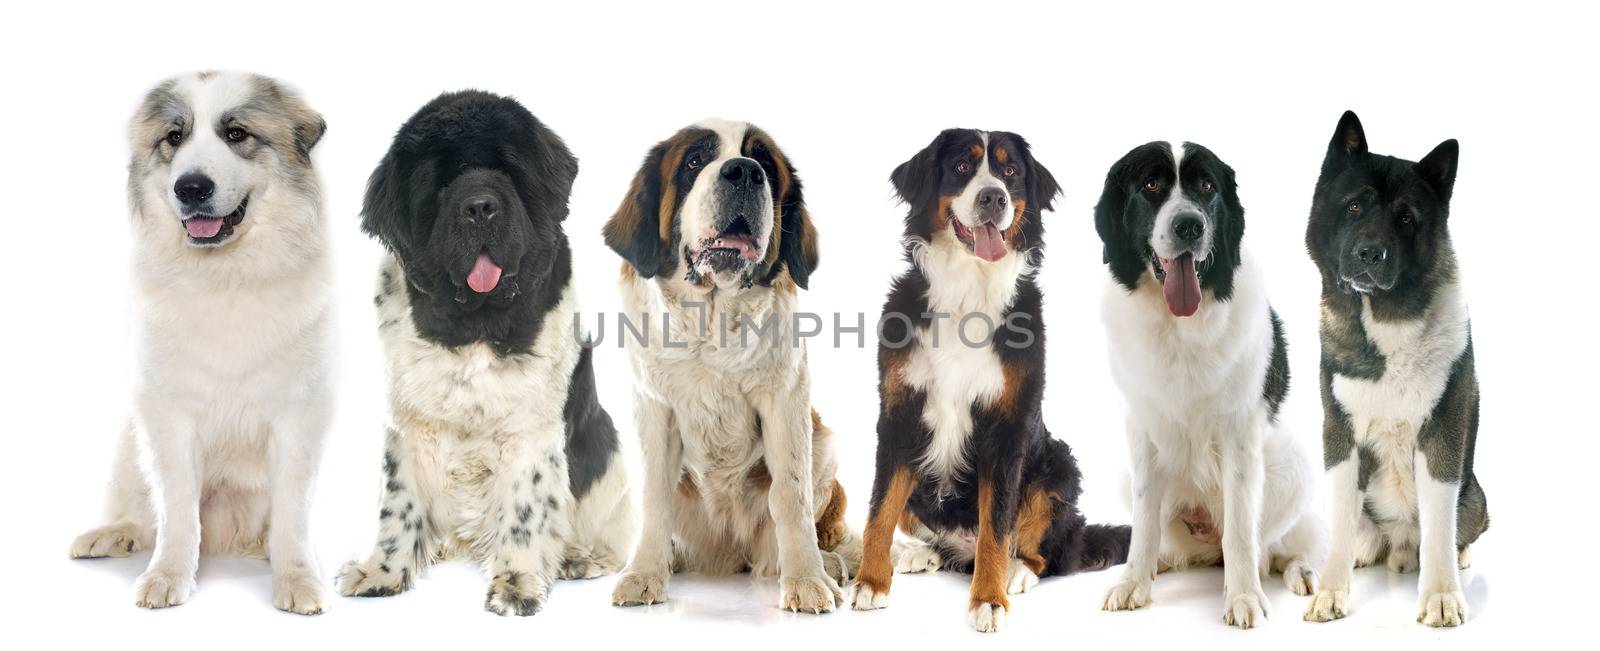 group of large dogs by cynoclub